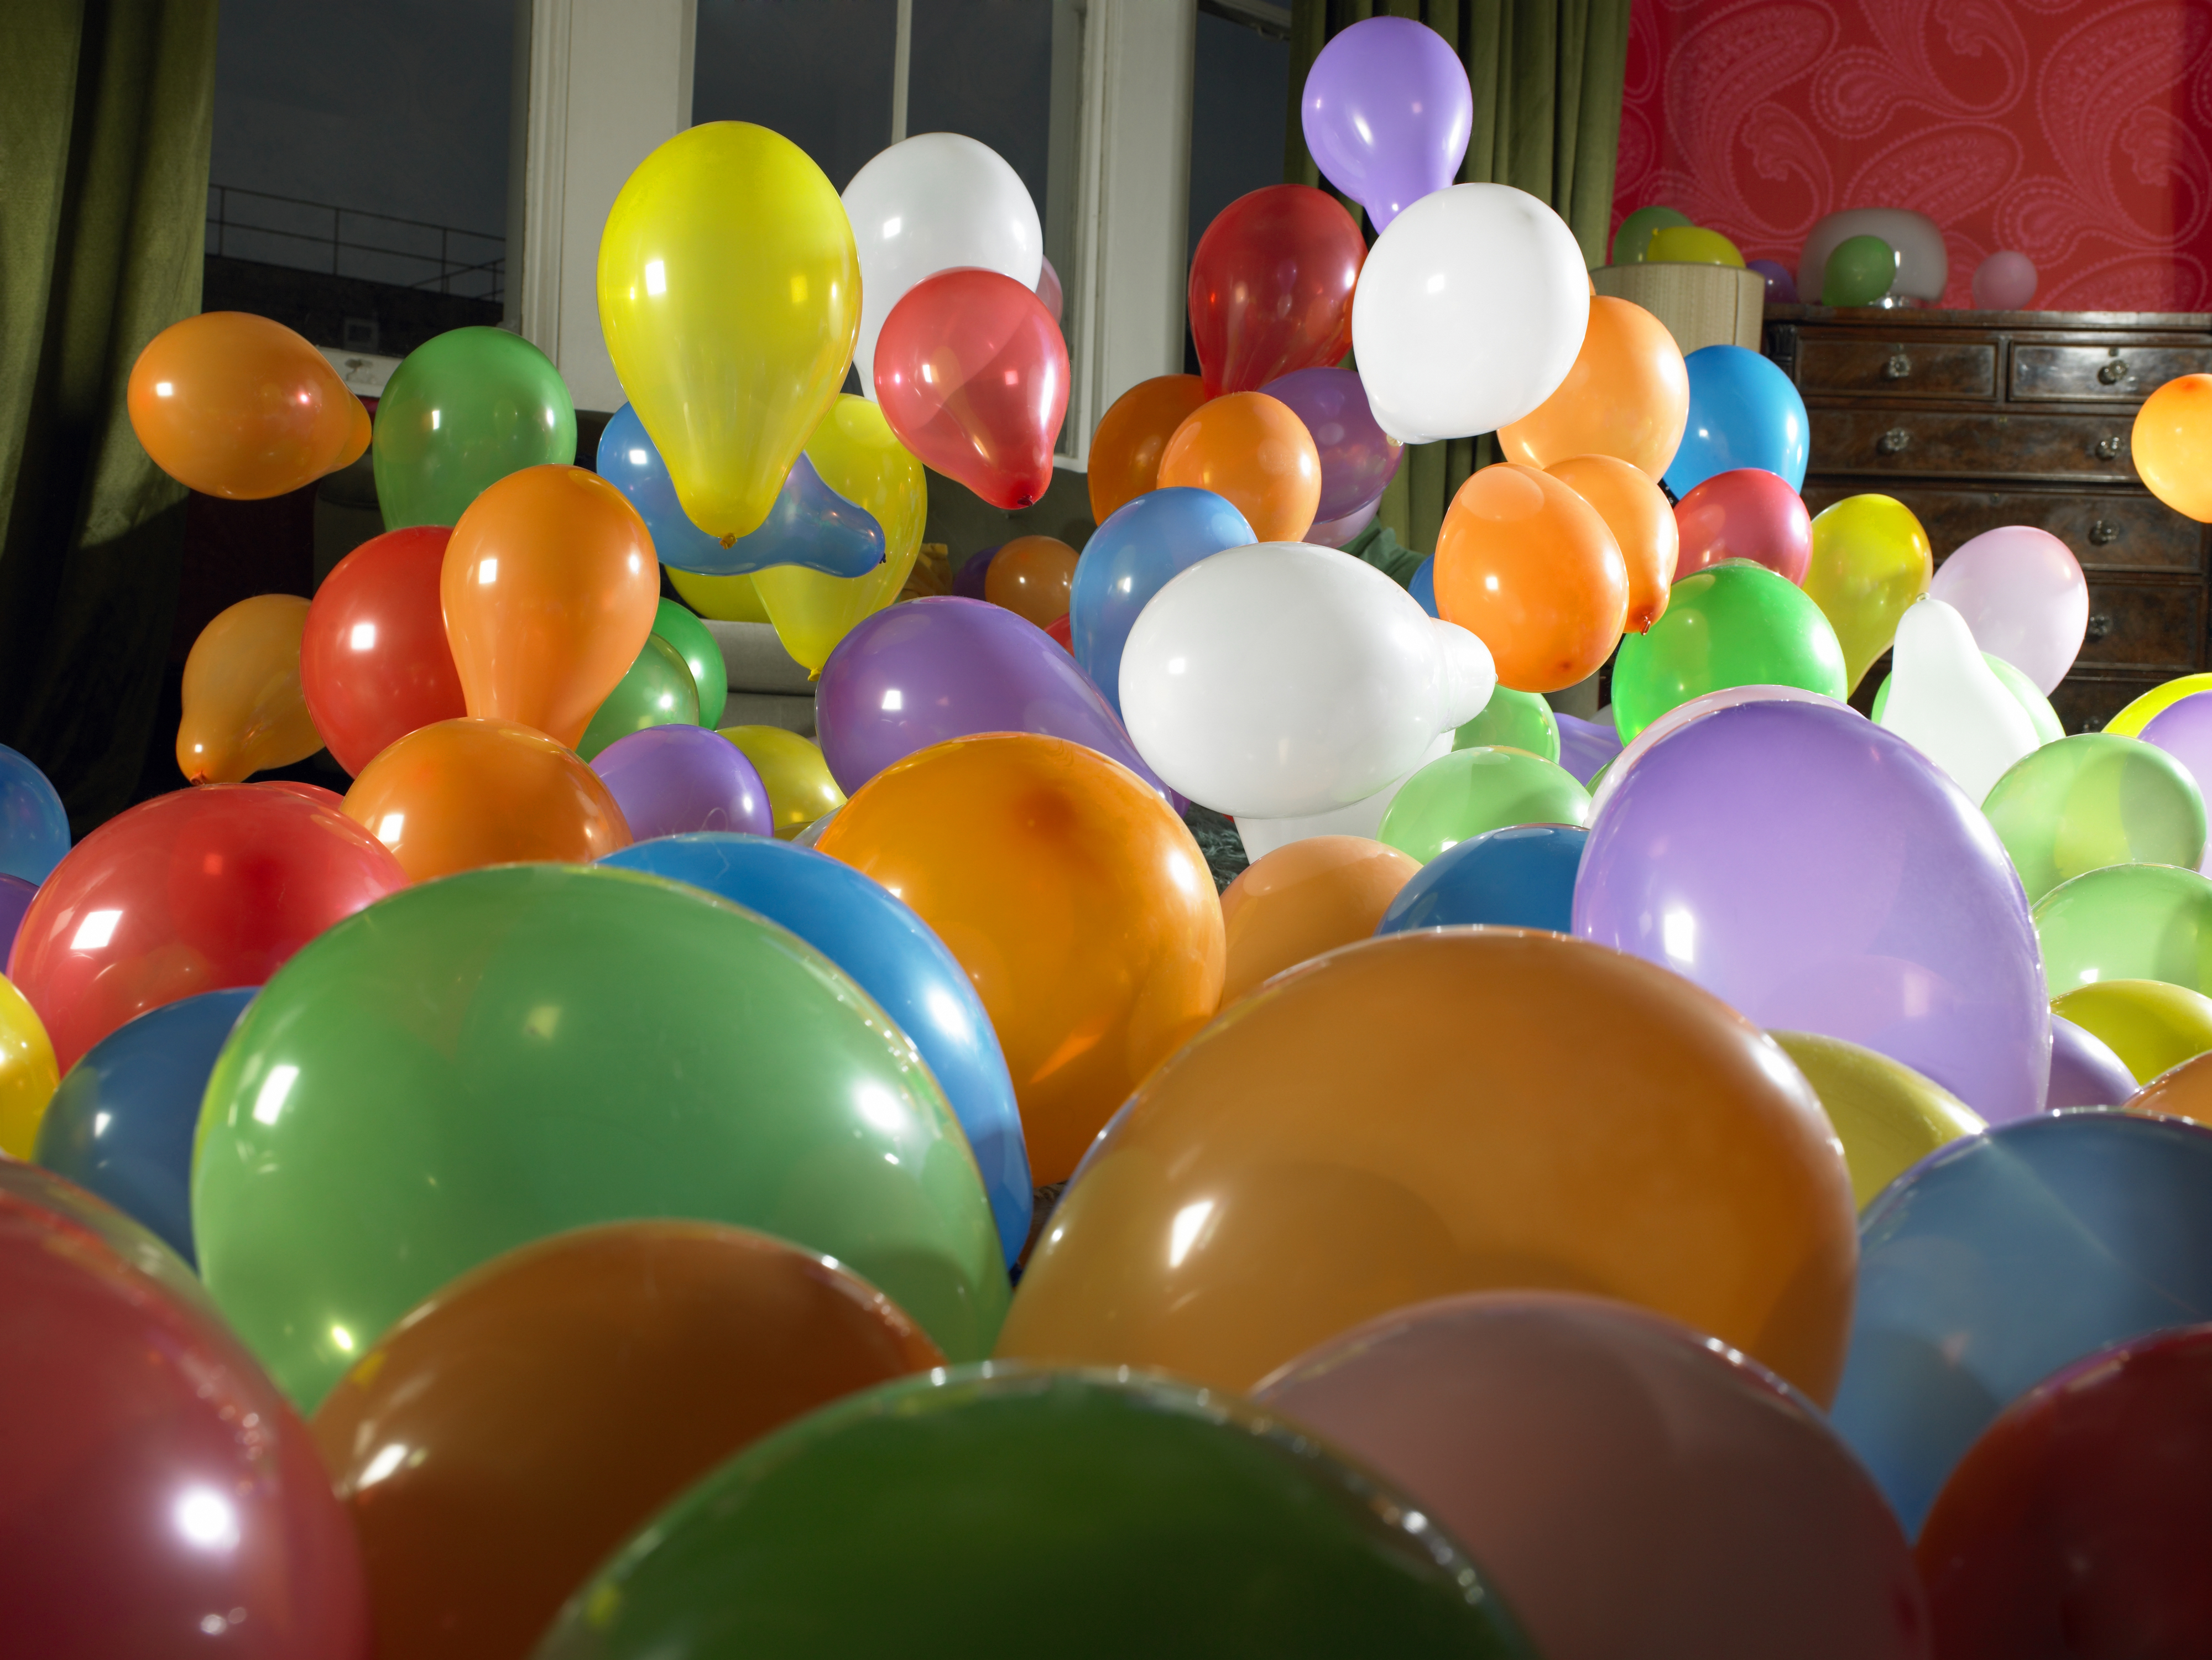 Room filled with multicolored balloons of various sizes